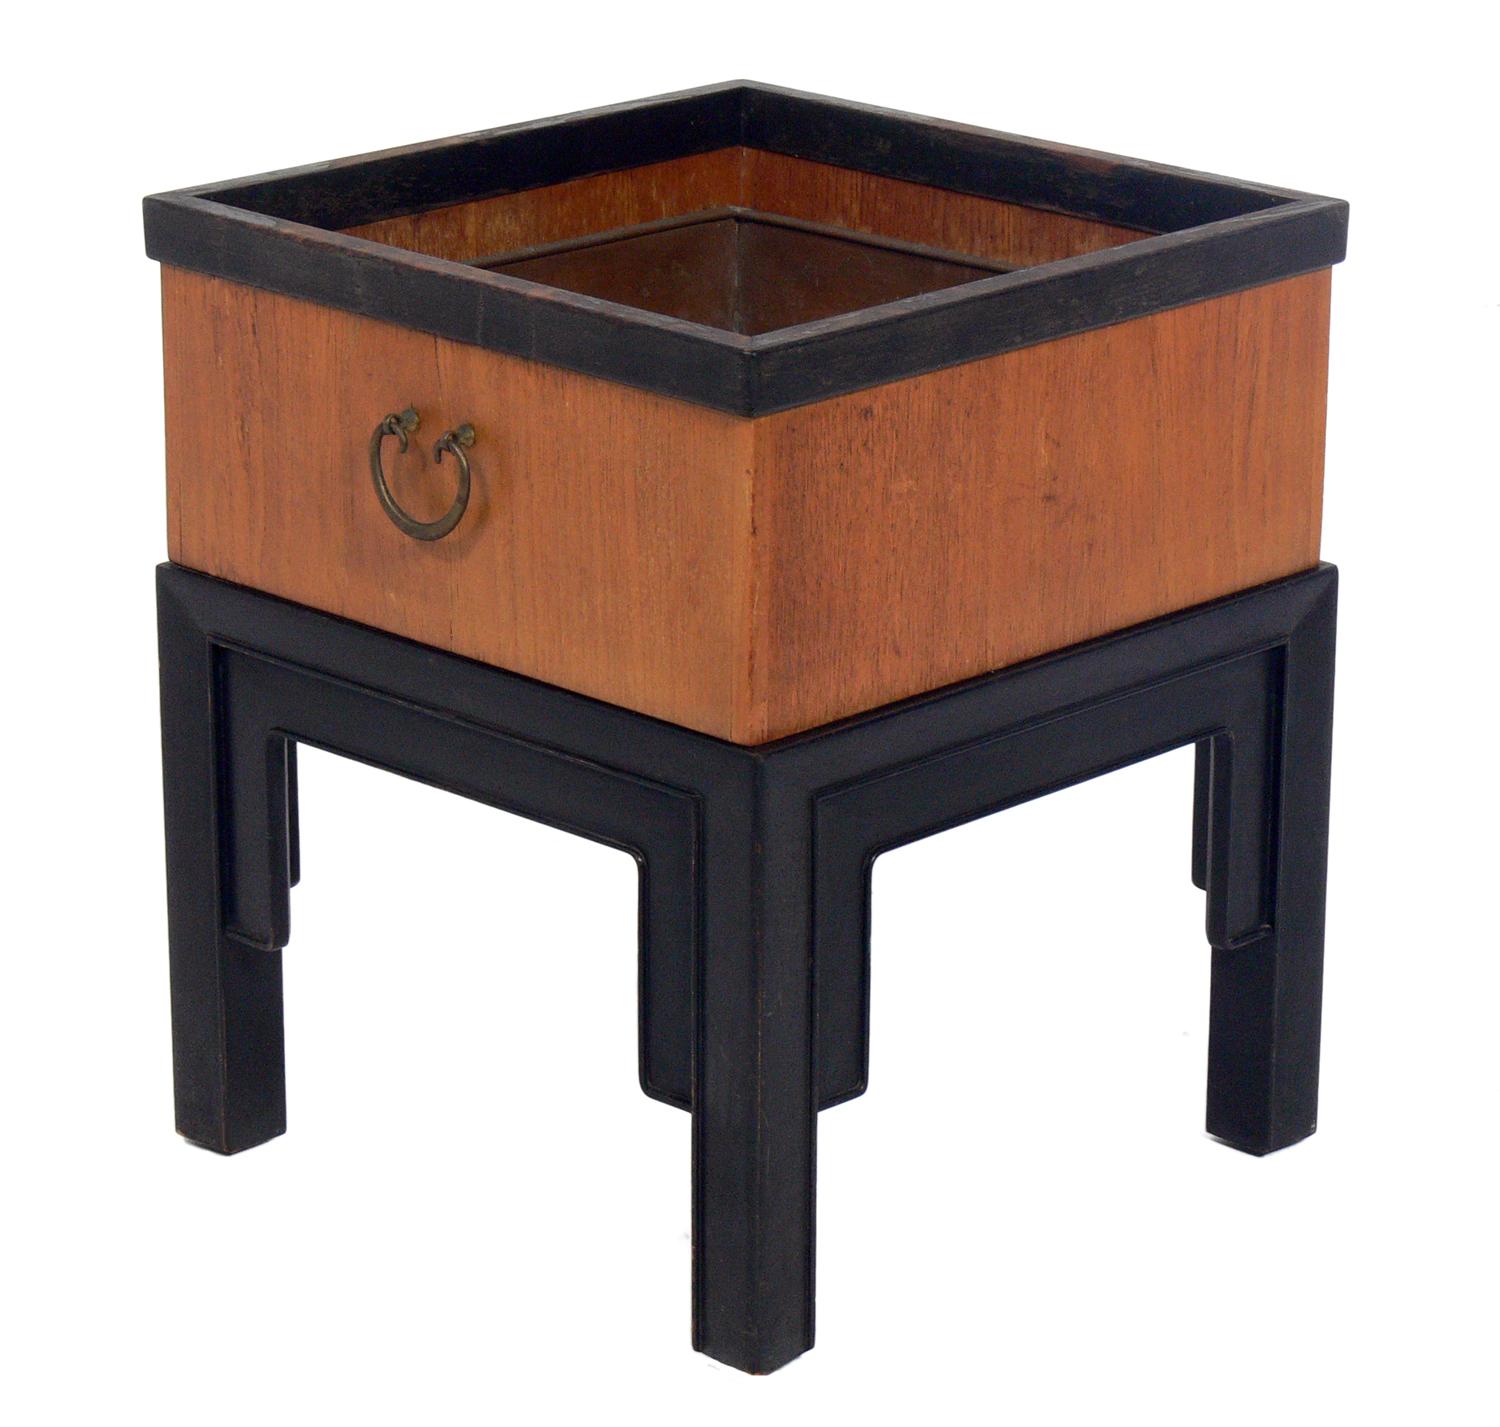 Asian influenced planter, designed by Michael Taylor for Baker, American, circa 1960s. This piece is currently being refinished and can be completed in your choice of color. The price noted includes refinishing in your choice of color.